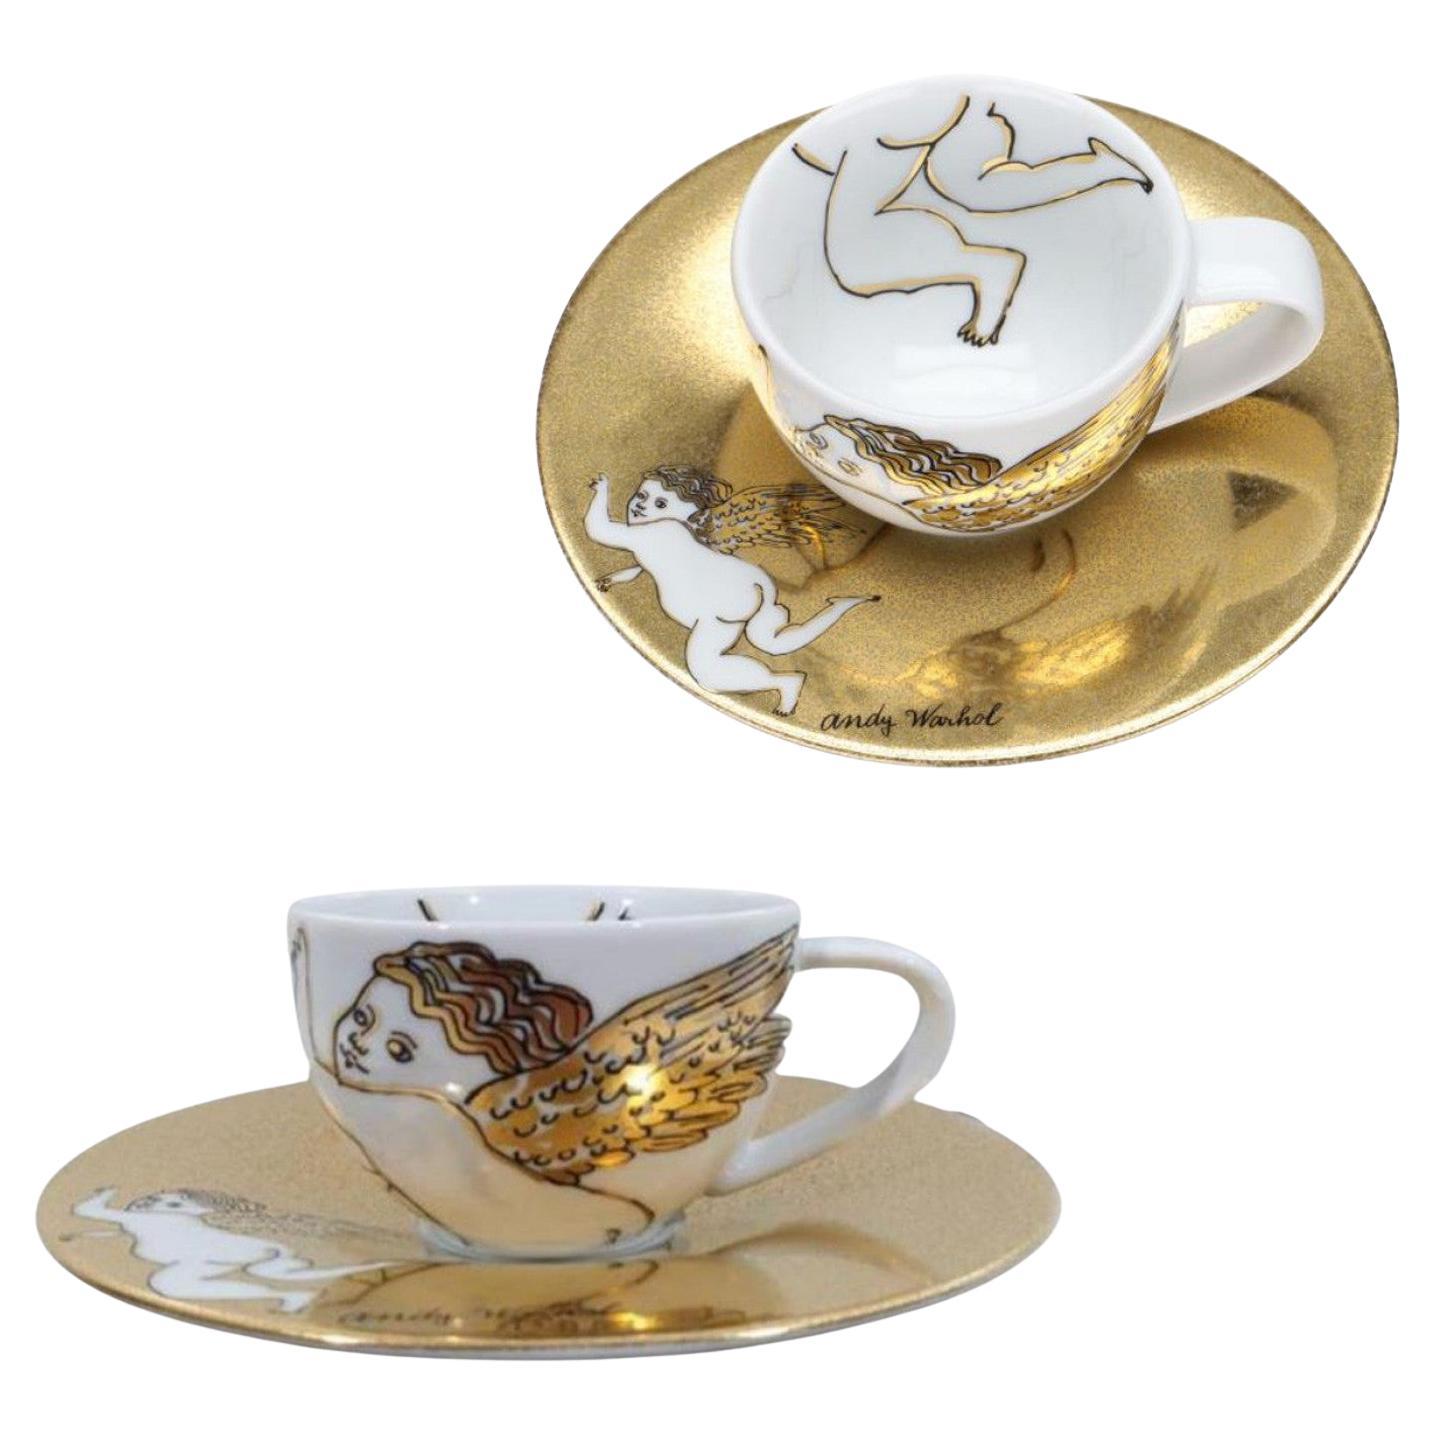 https://a.1stdibscdn.com/set-of-2-espresso-cup-and-saucer-golden-angels-by-andy-warhol-for-rosenthal-198-for-sale/f_24363/f_314906321669616810692/f_31490632_1669616811134_bg_processed.jpg